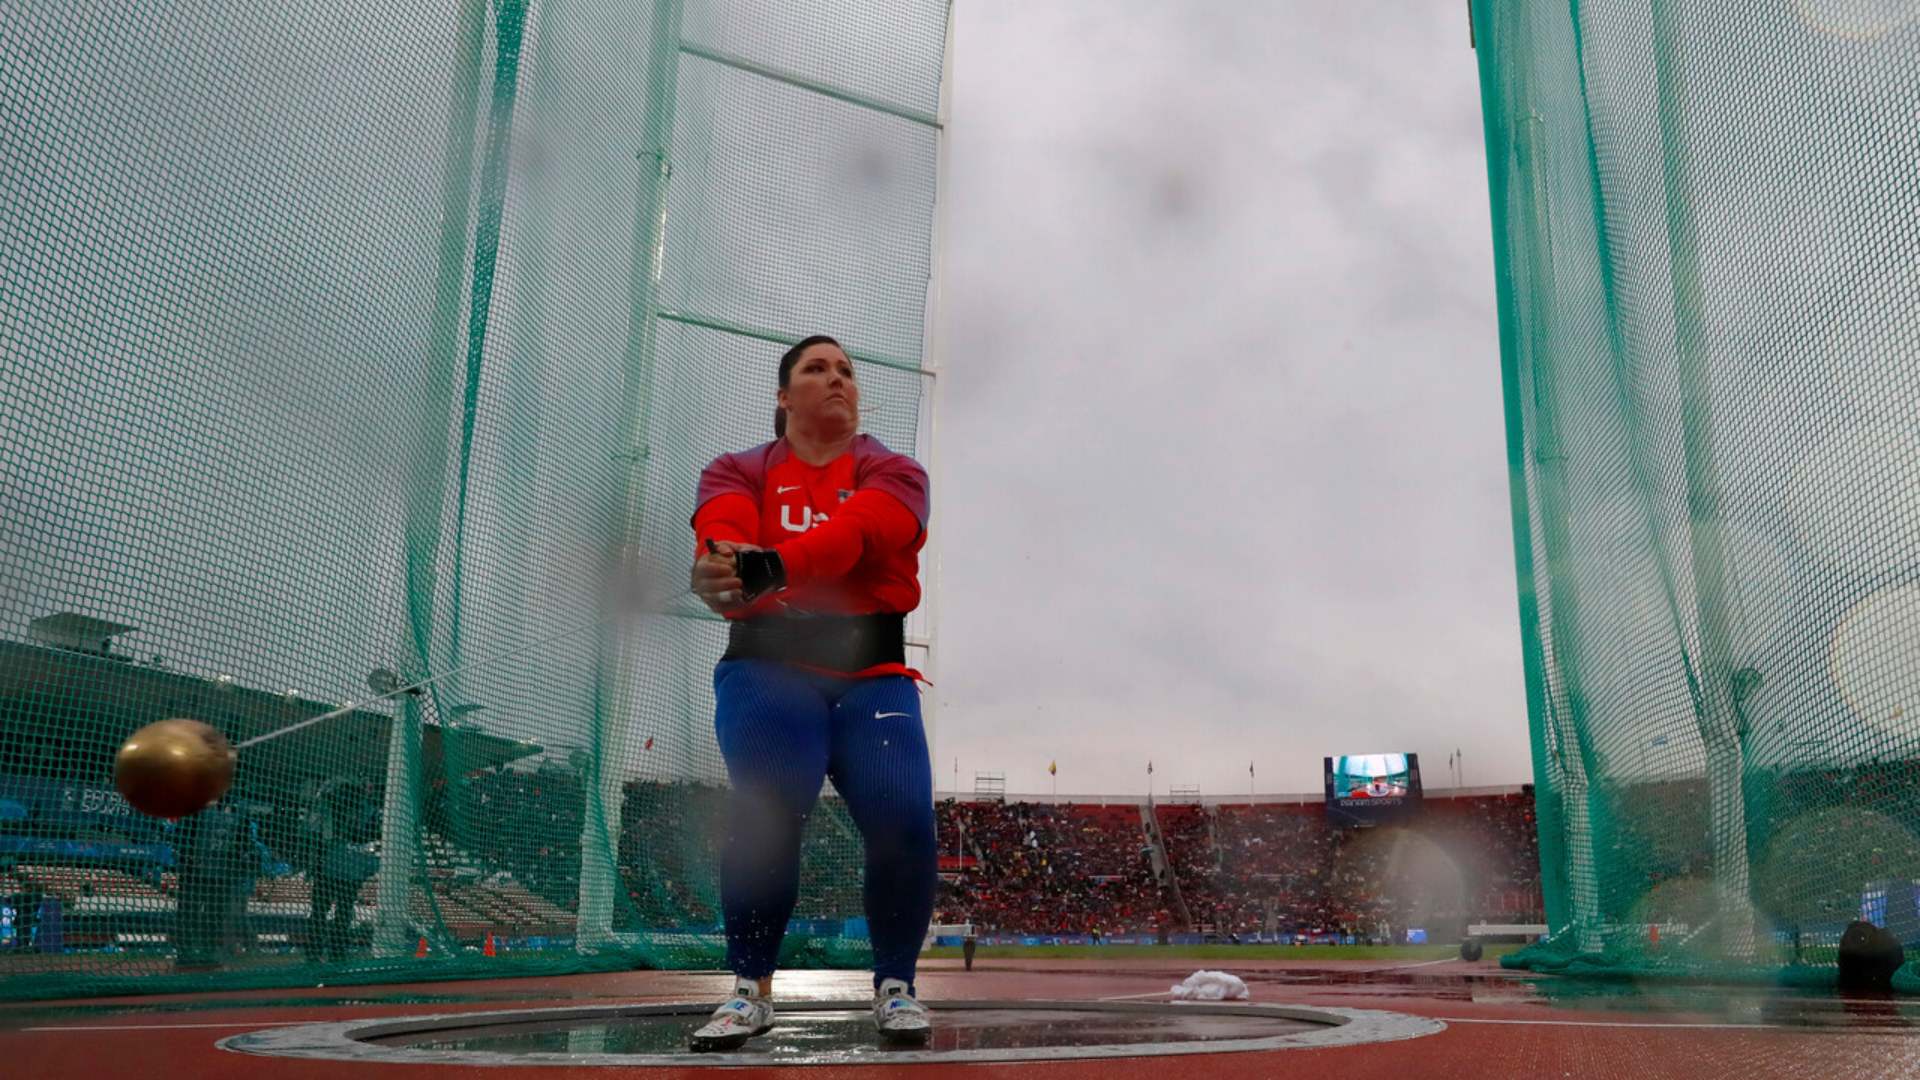 The United States wins gold in the hammer throw